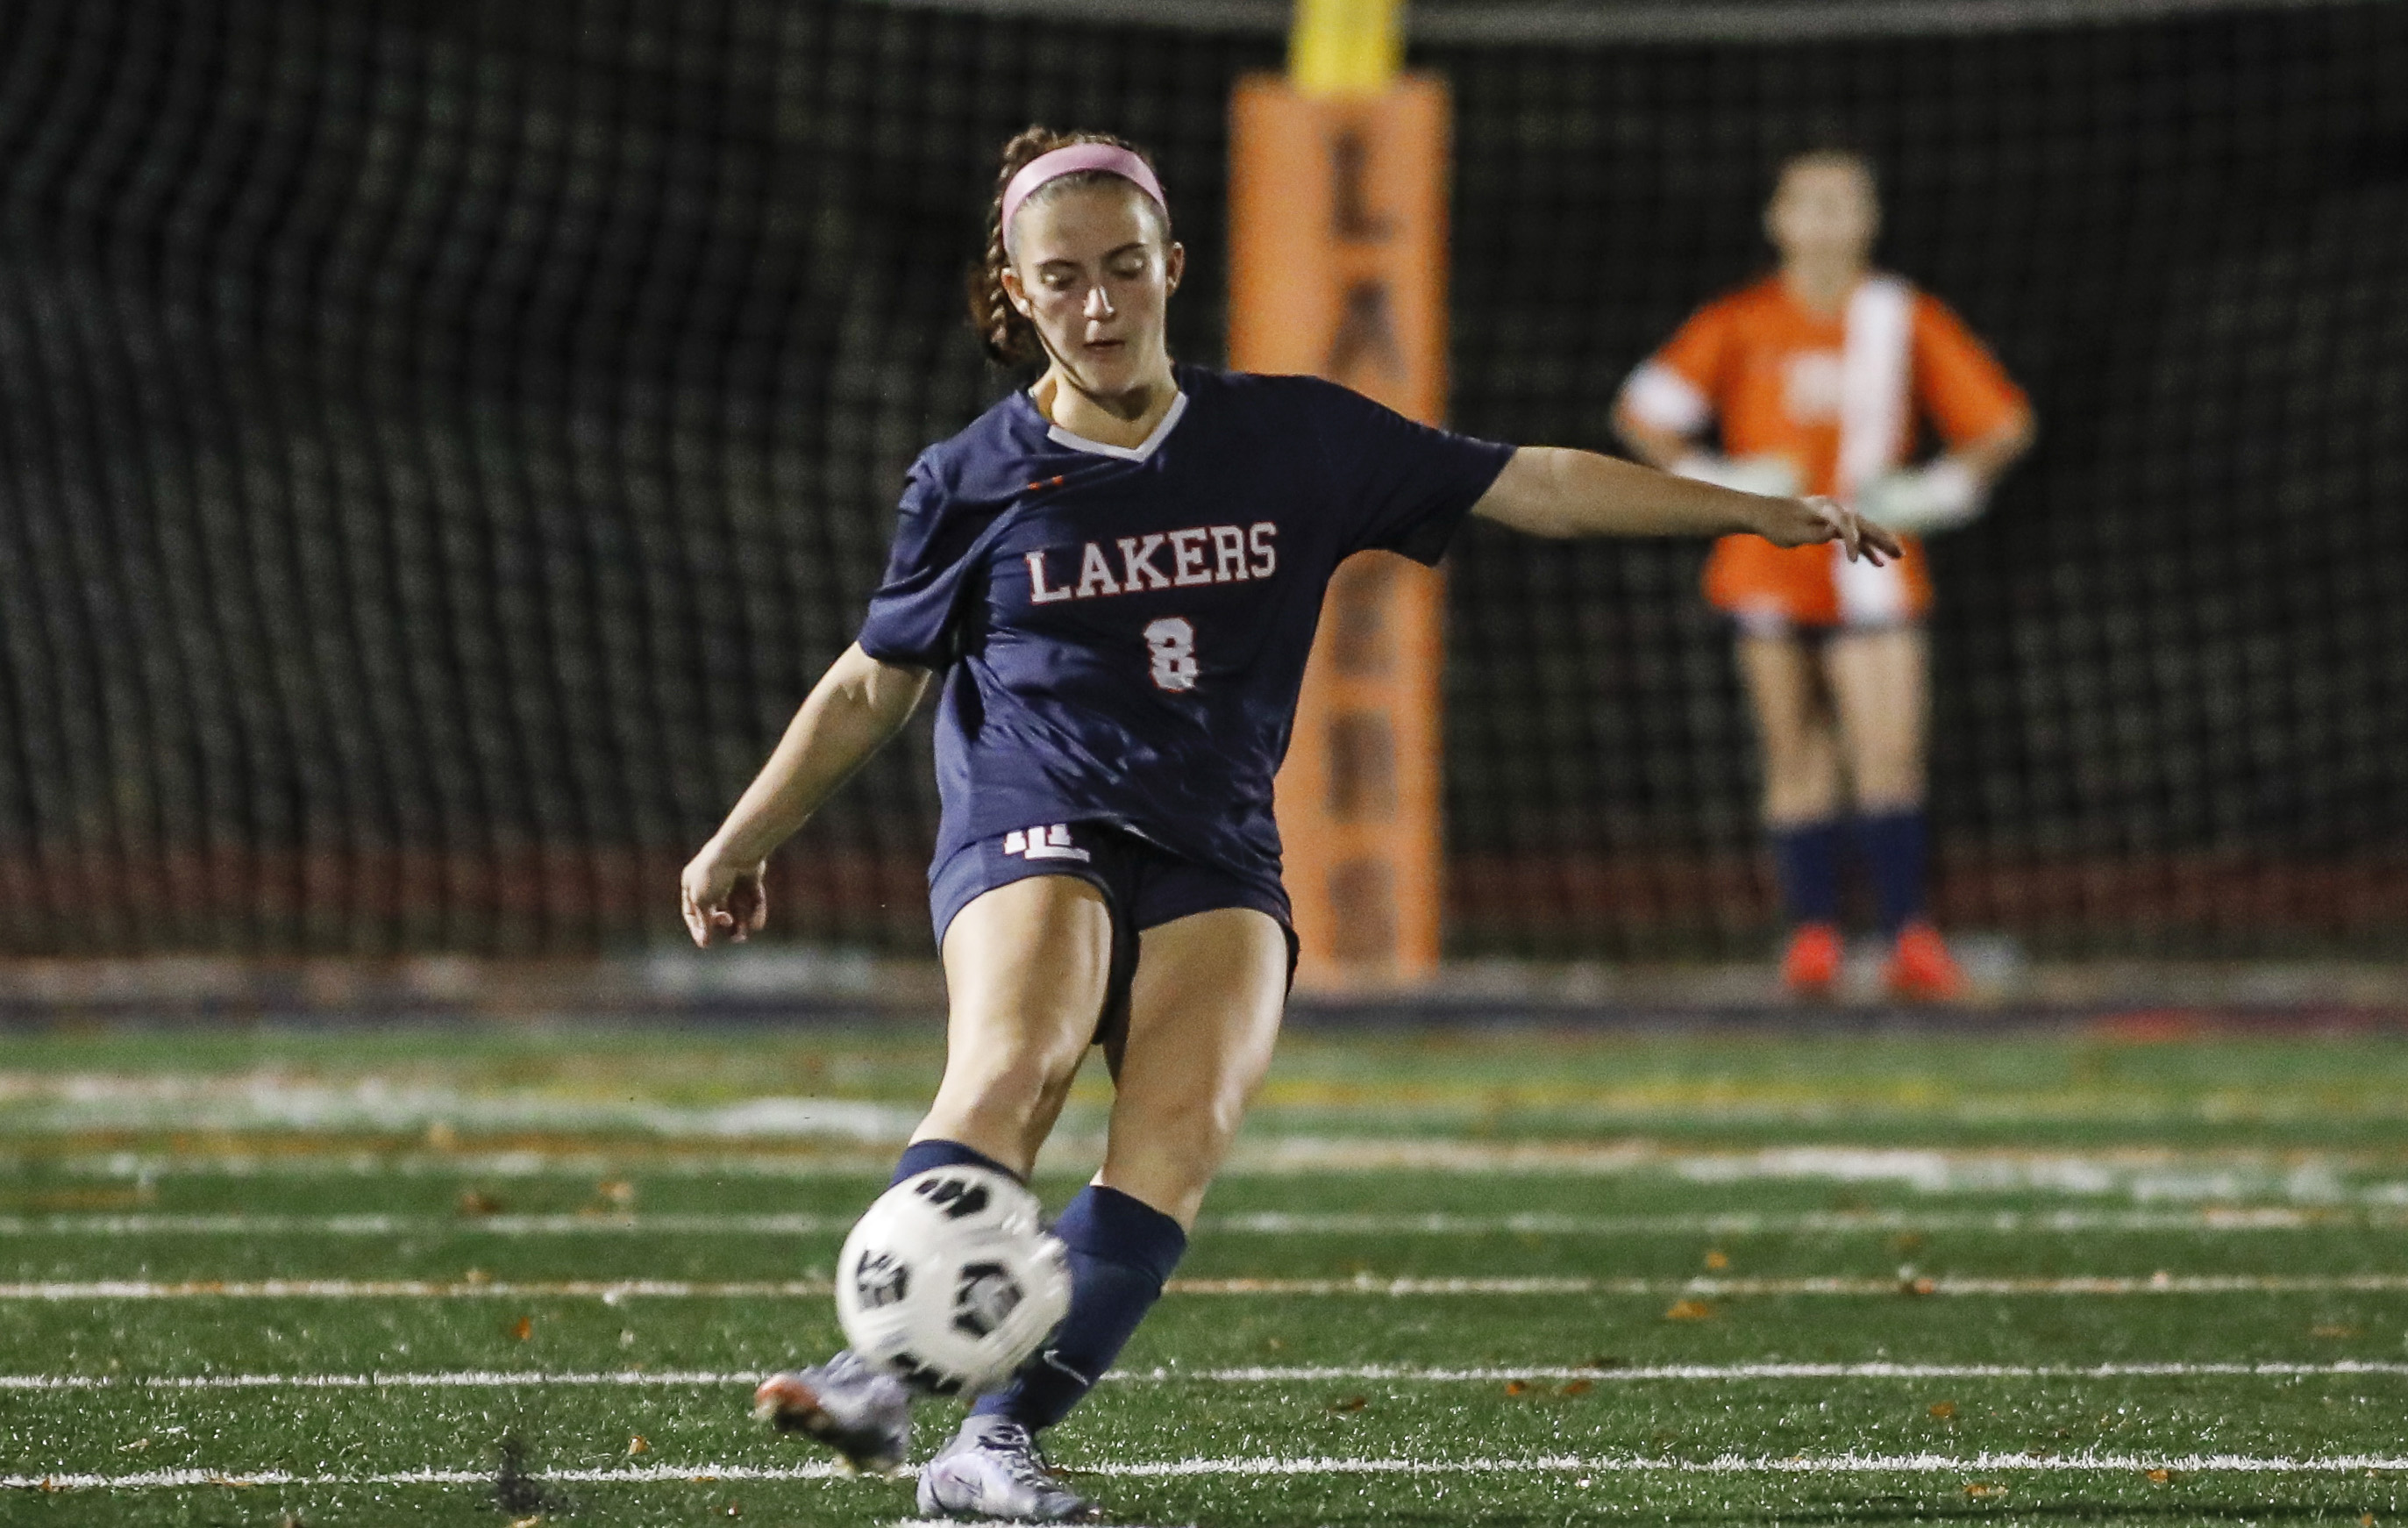 Girls Soccer: Mountain Lakes vs. Brearley in N2G1 first round on Oct ...